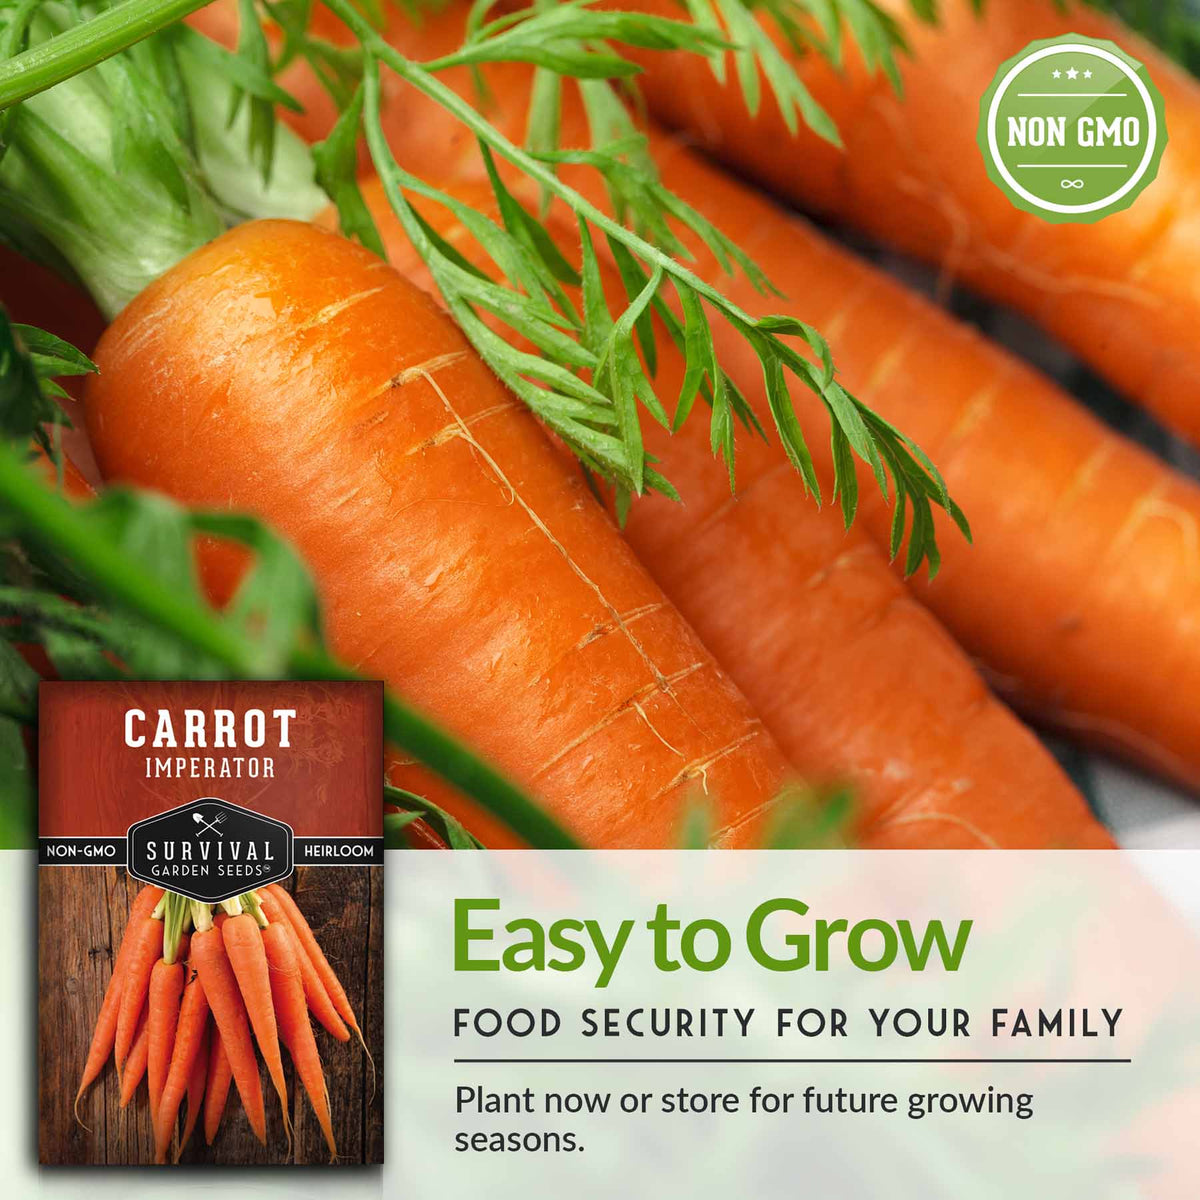 Carrots are easy to grow